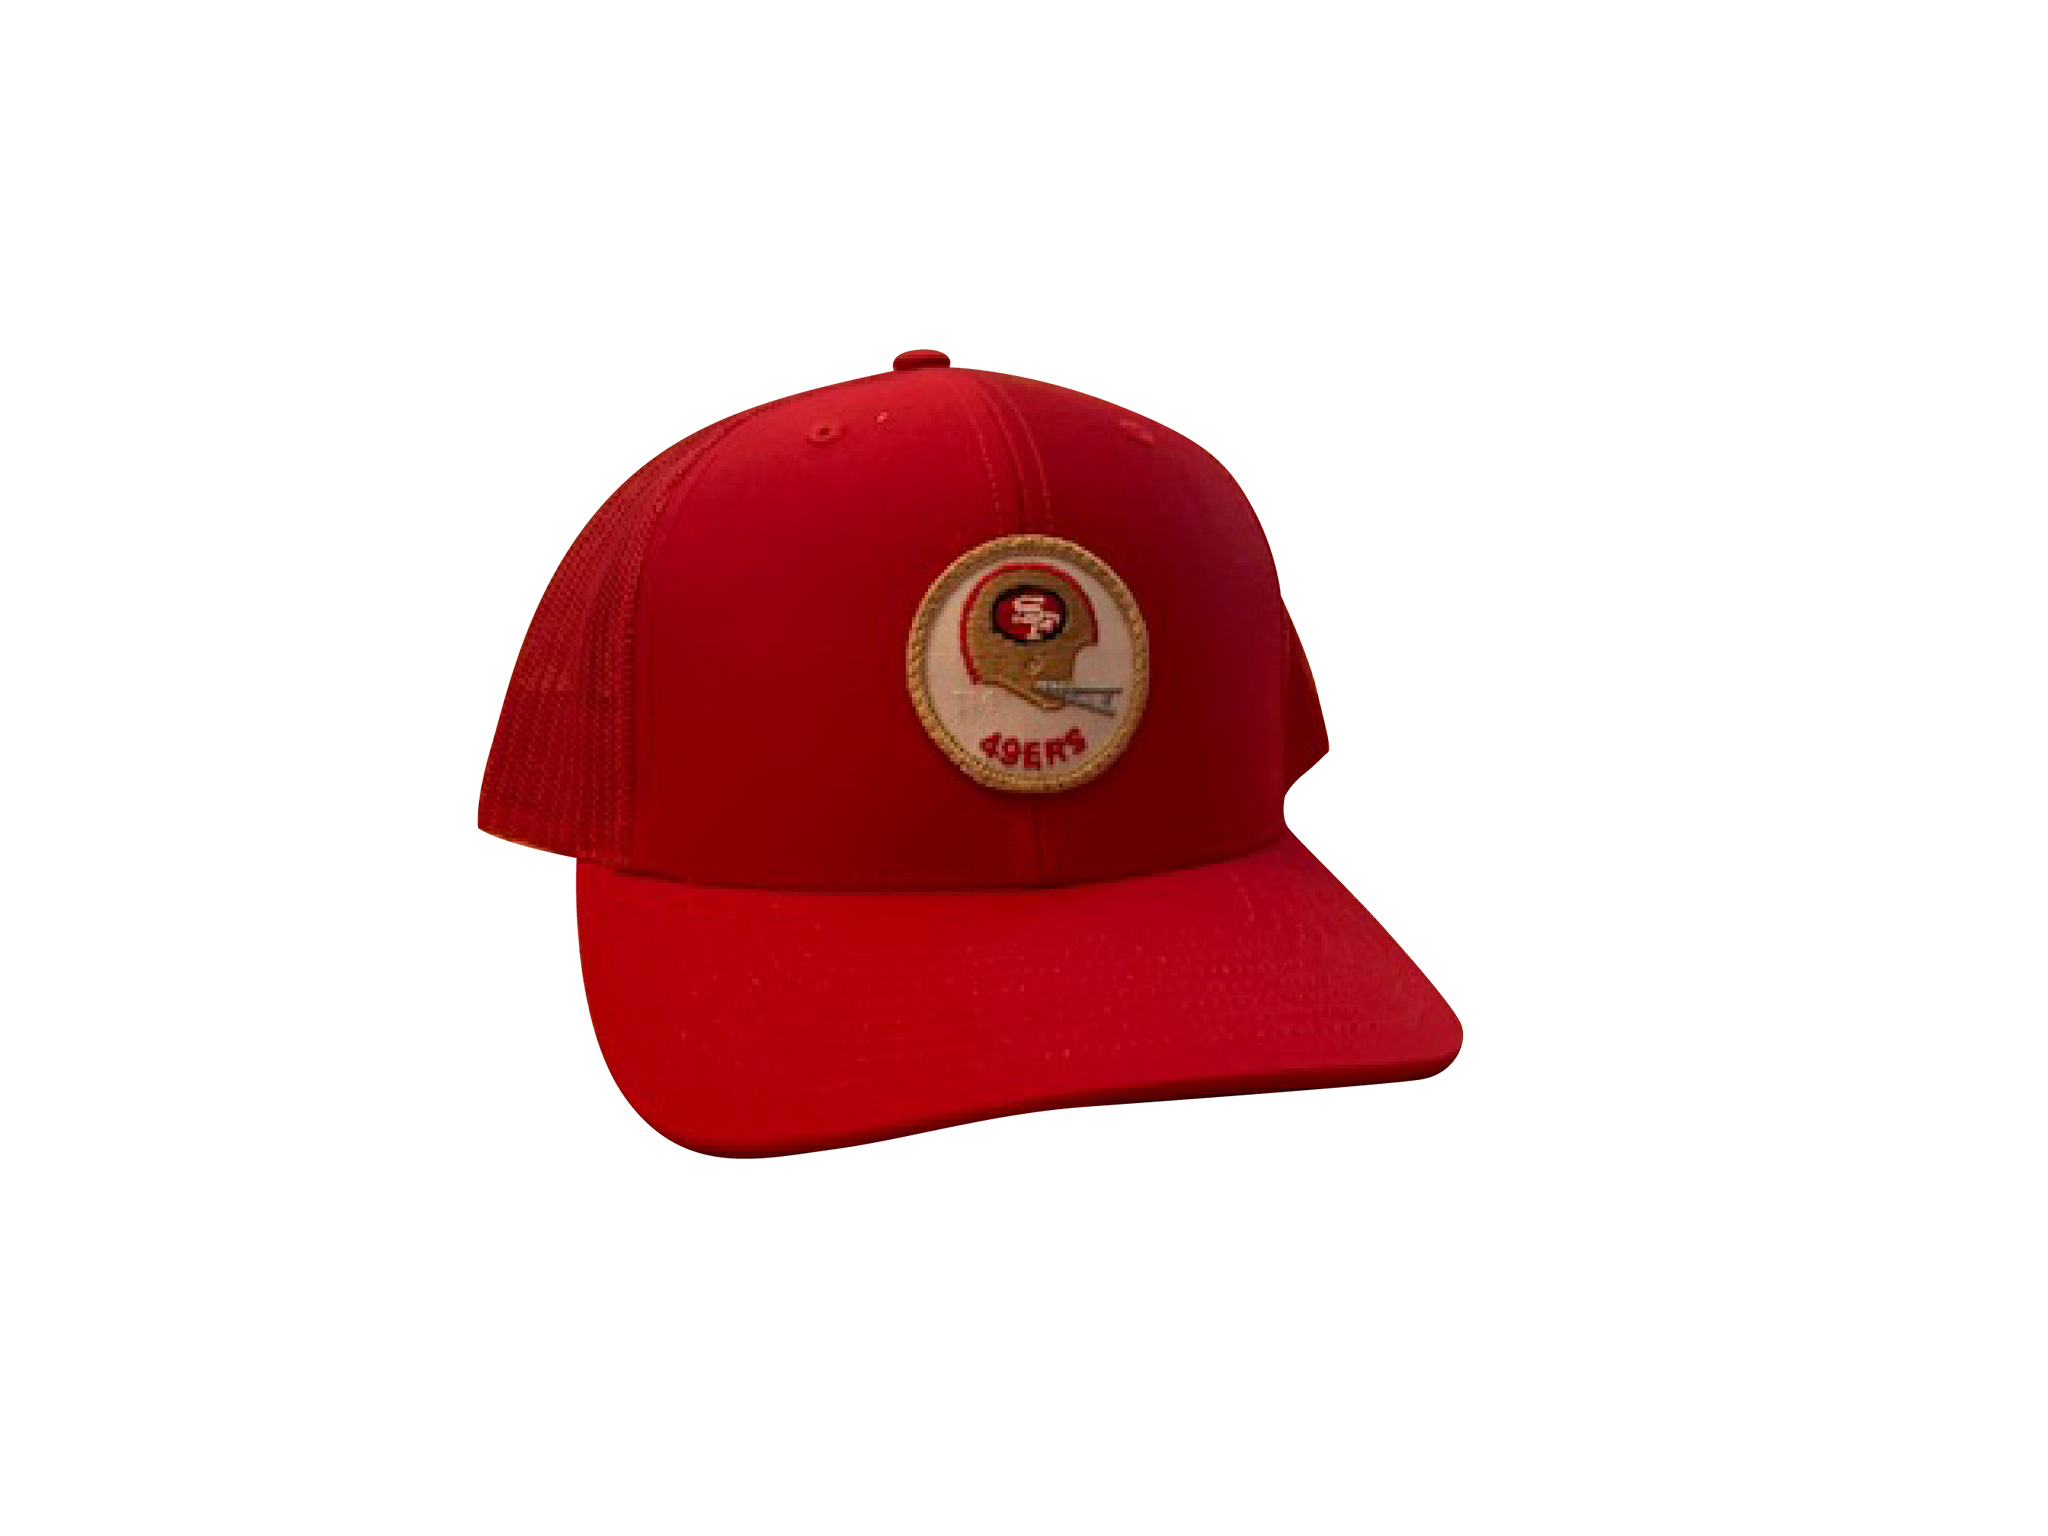 San Francisco 49ers Patch Trucker Cap - Red